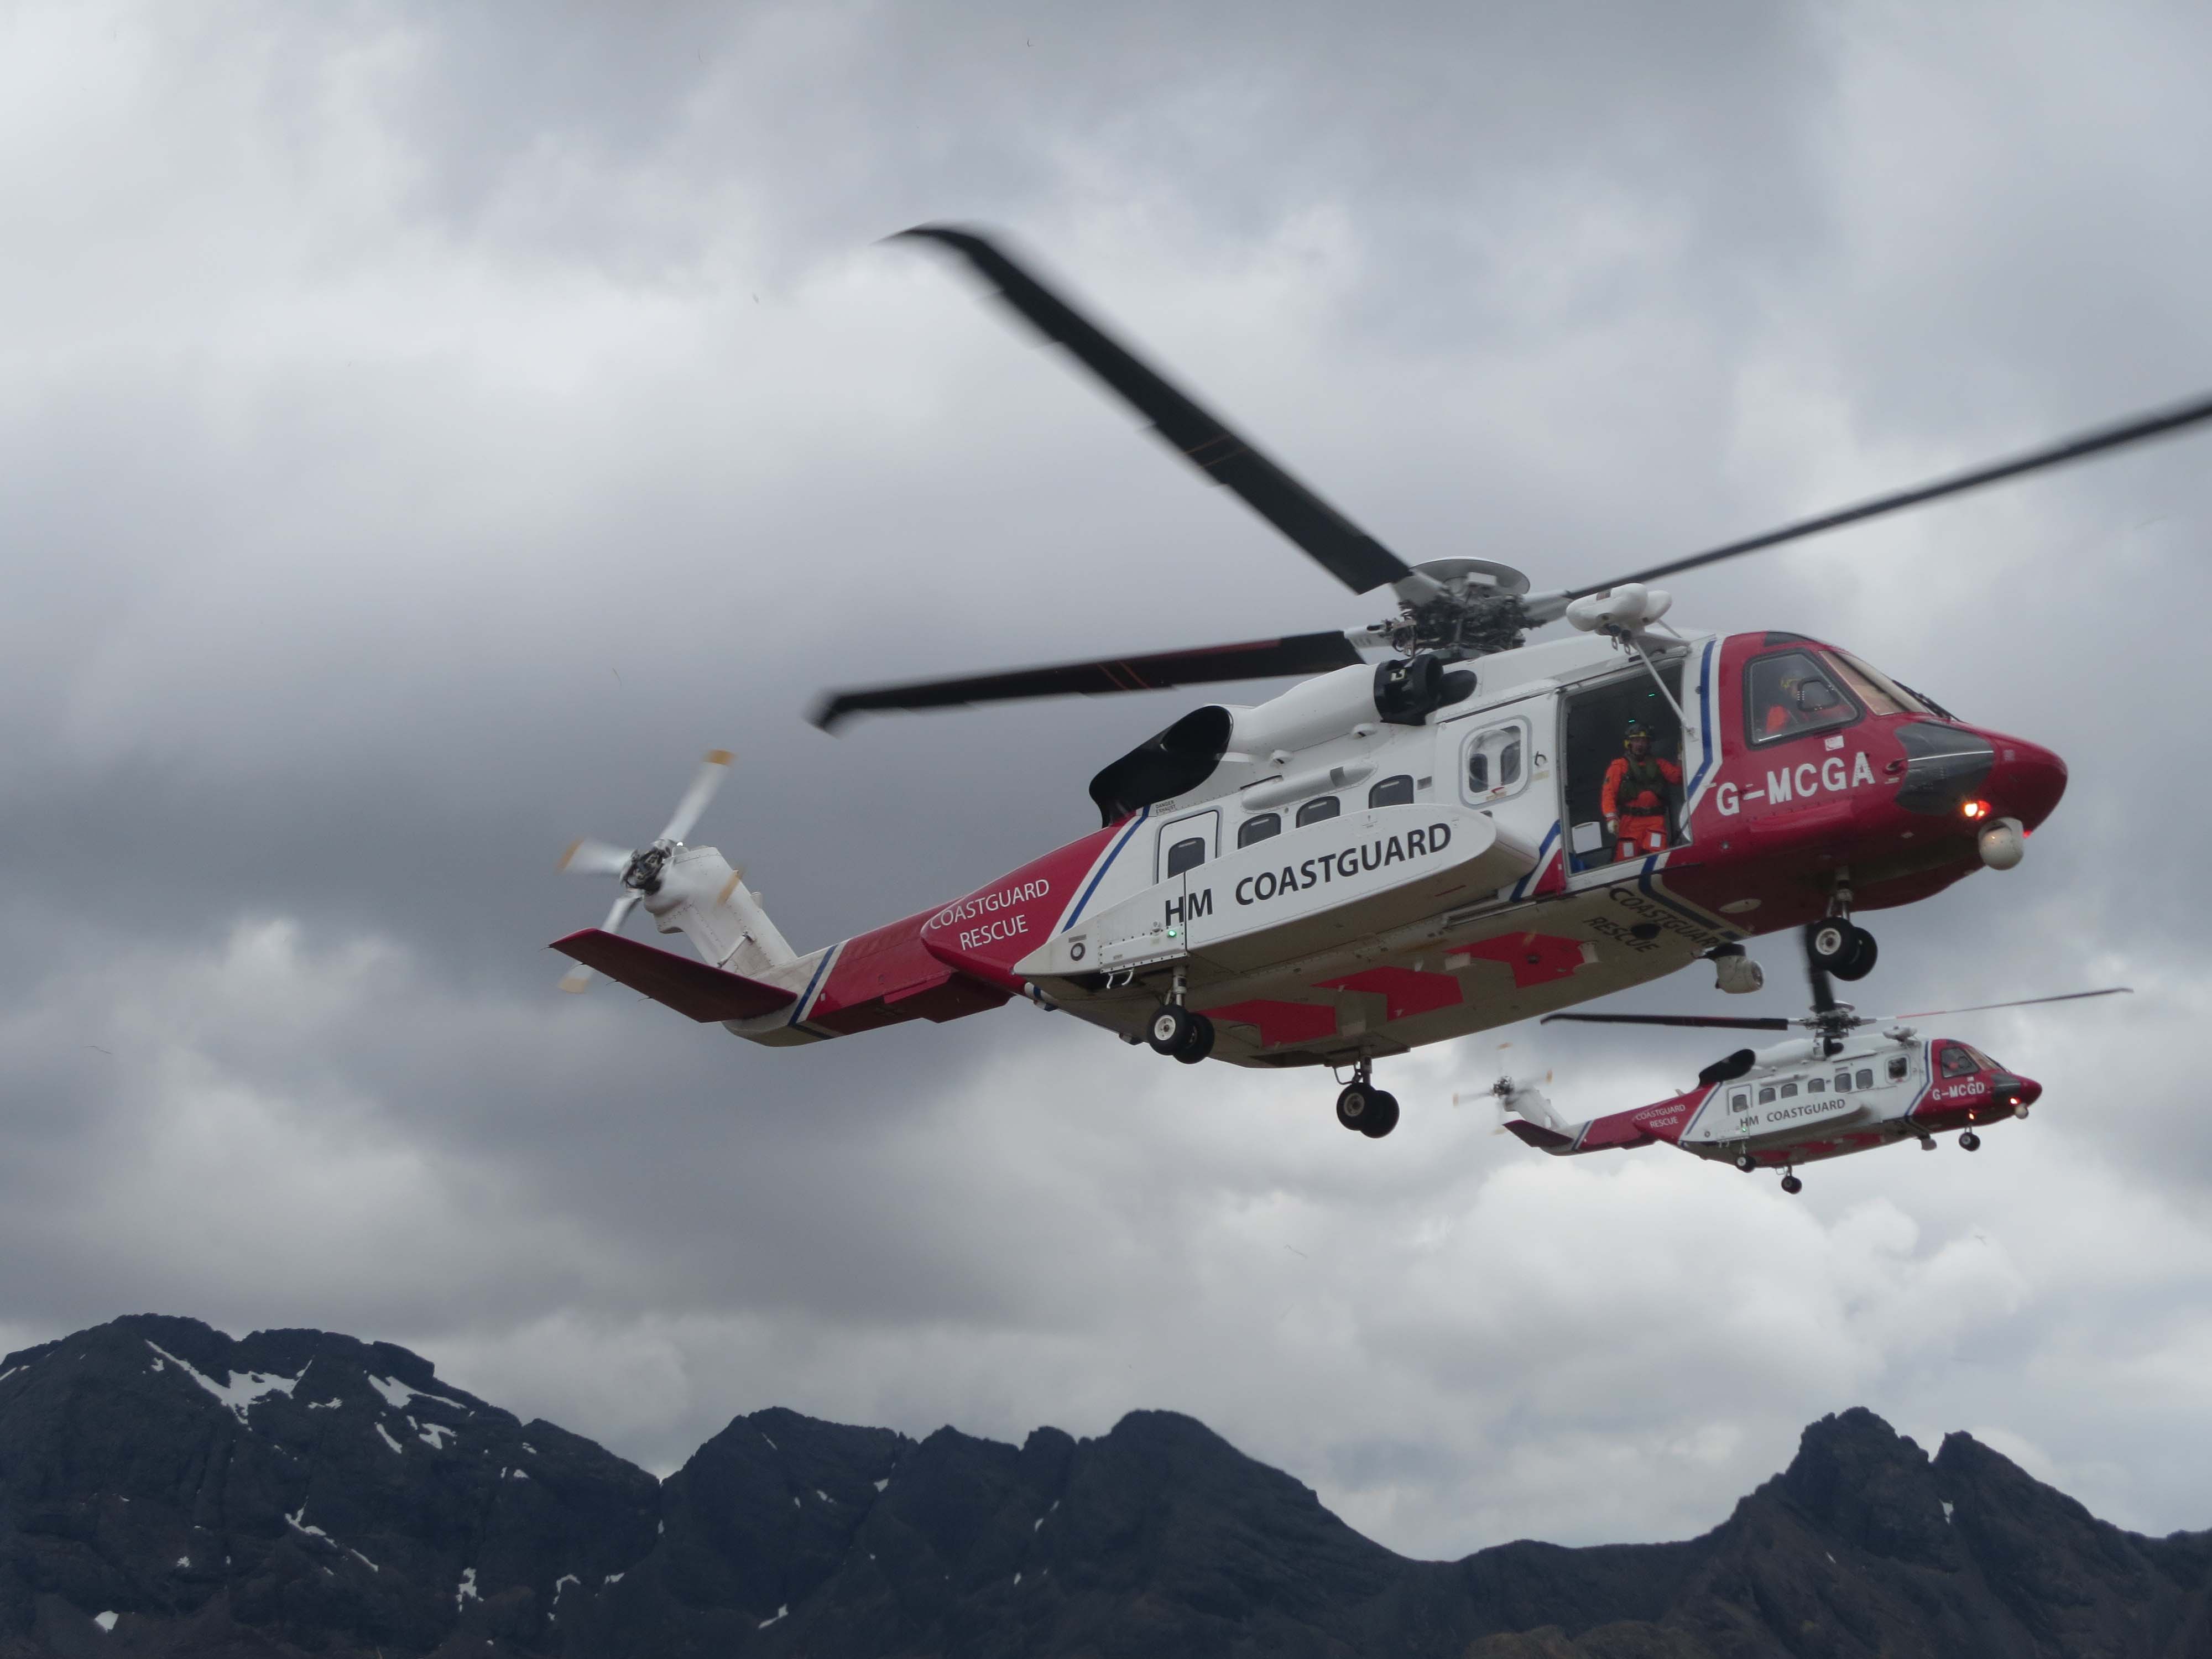 The search and rescue helicopters based in Stornoway